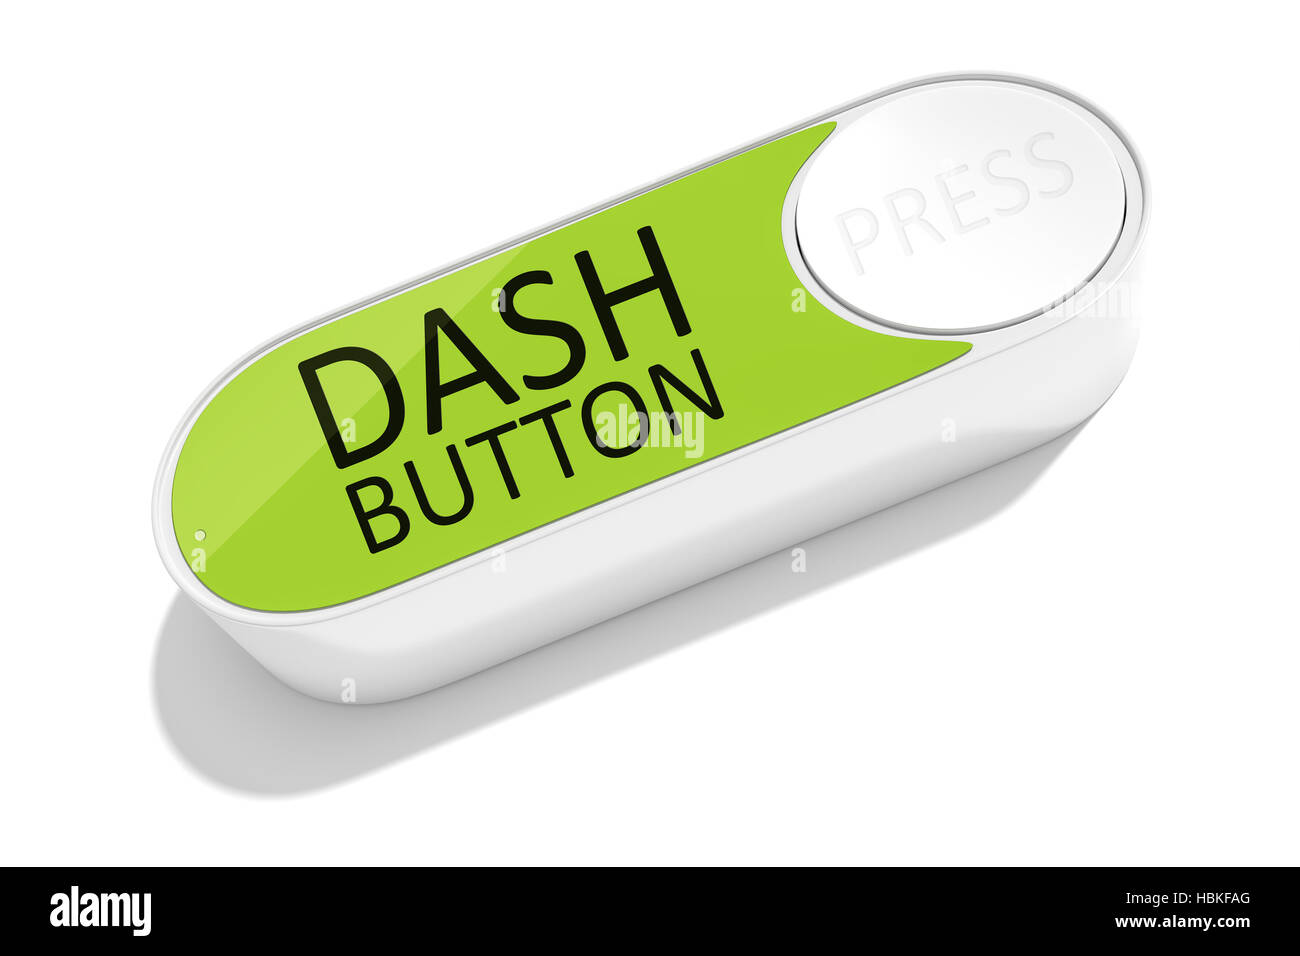 a dash button to order things Stock Photo